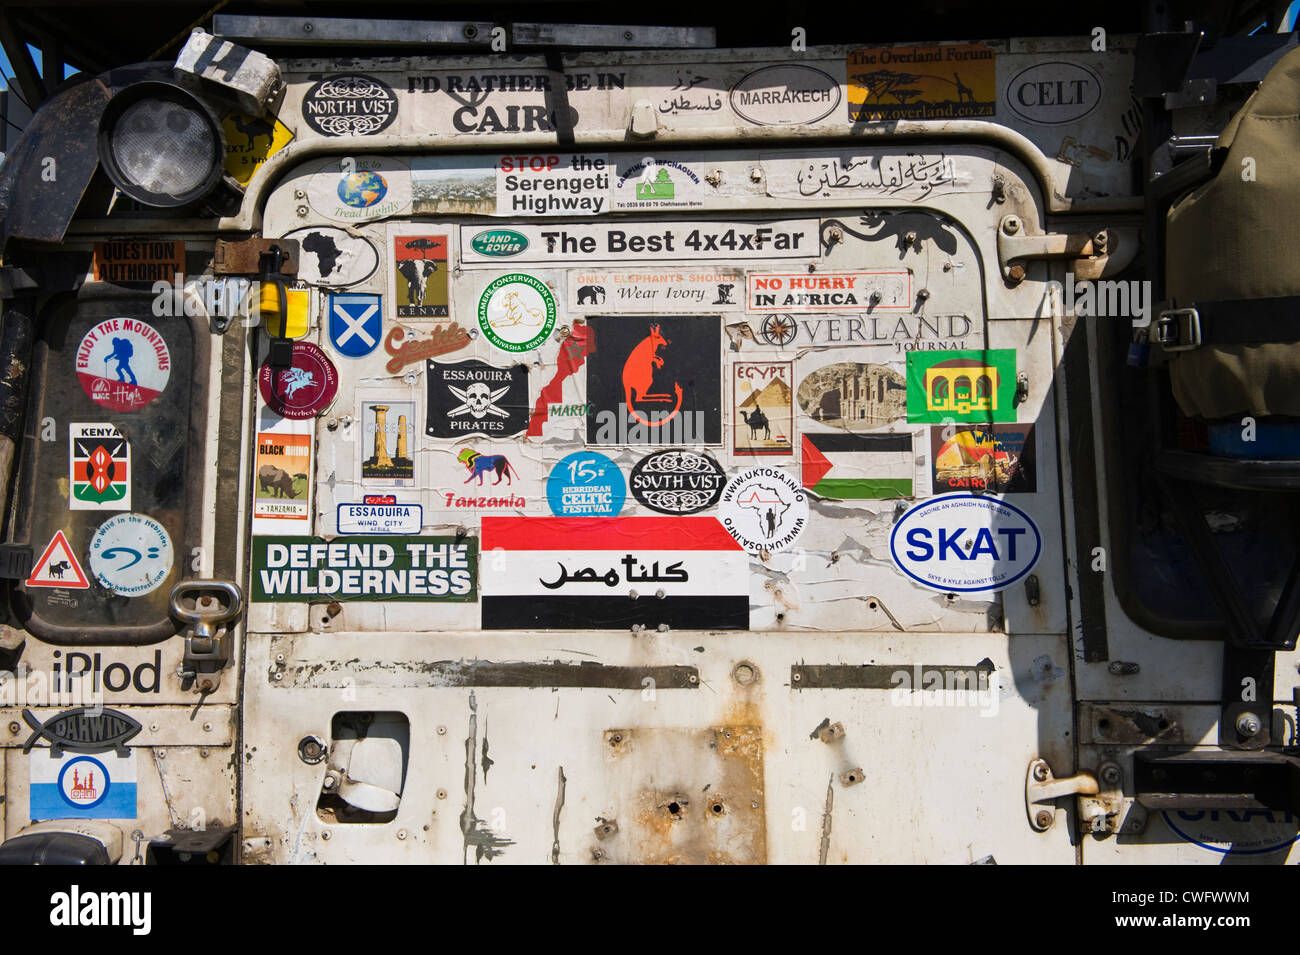 stickers-on-rear-of-4x4-land-rover-defender-expedition-vehicle-at-CWFWWM.jpg